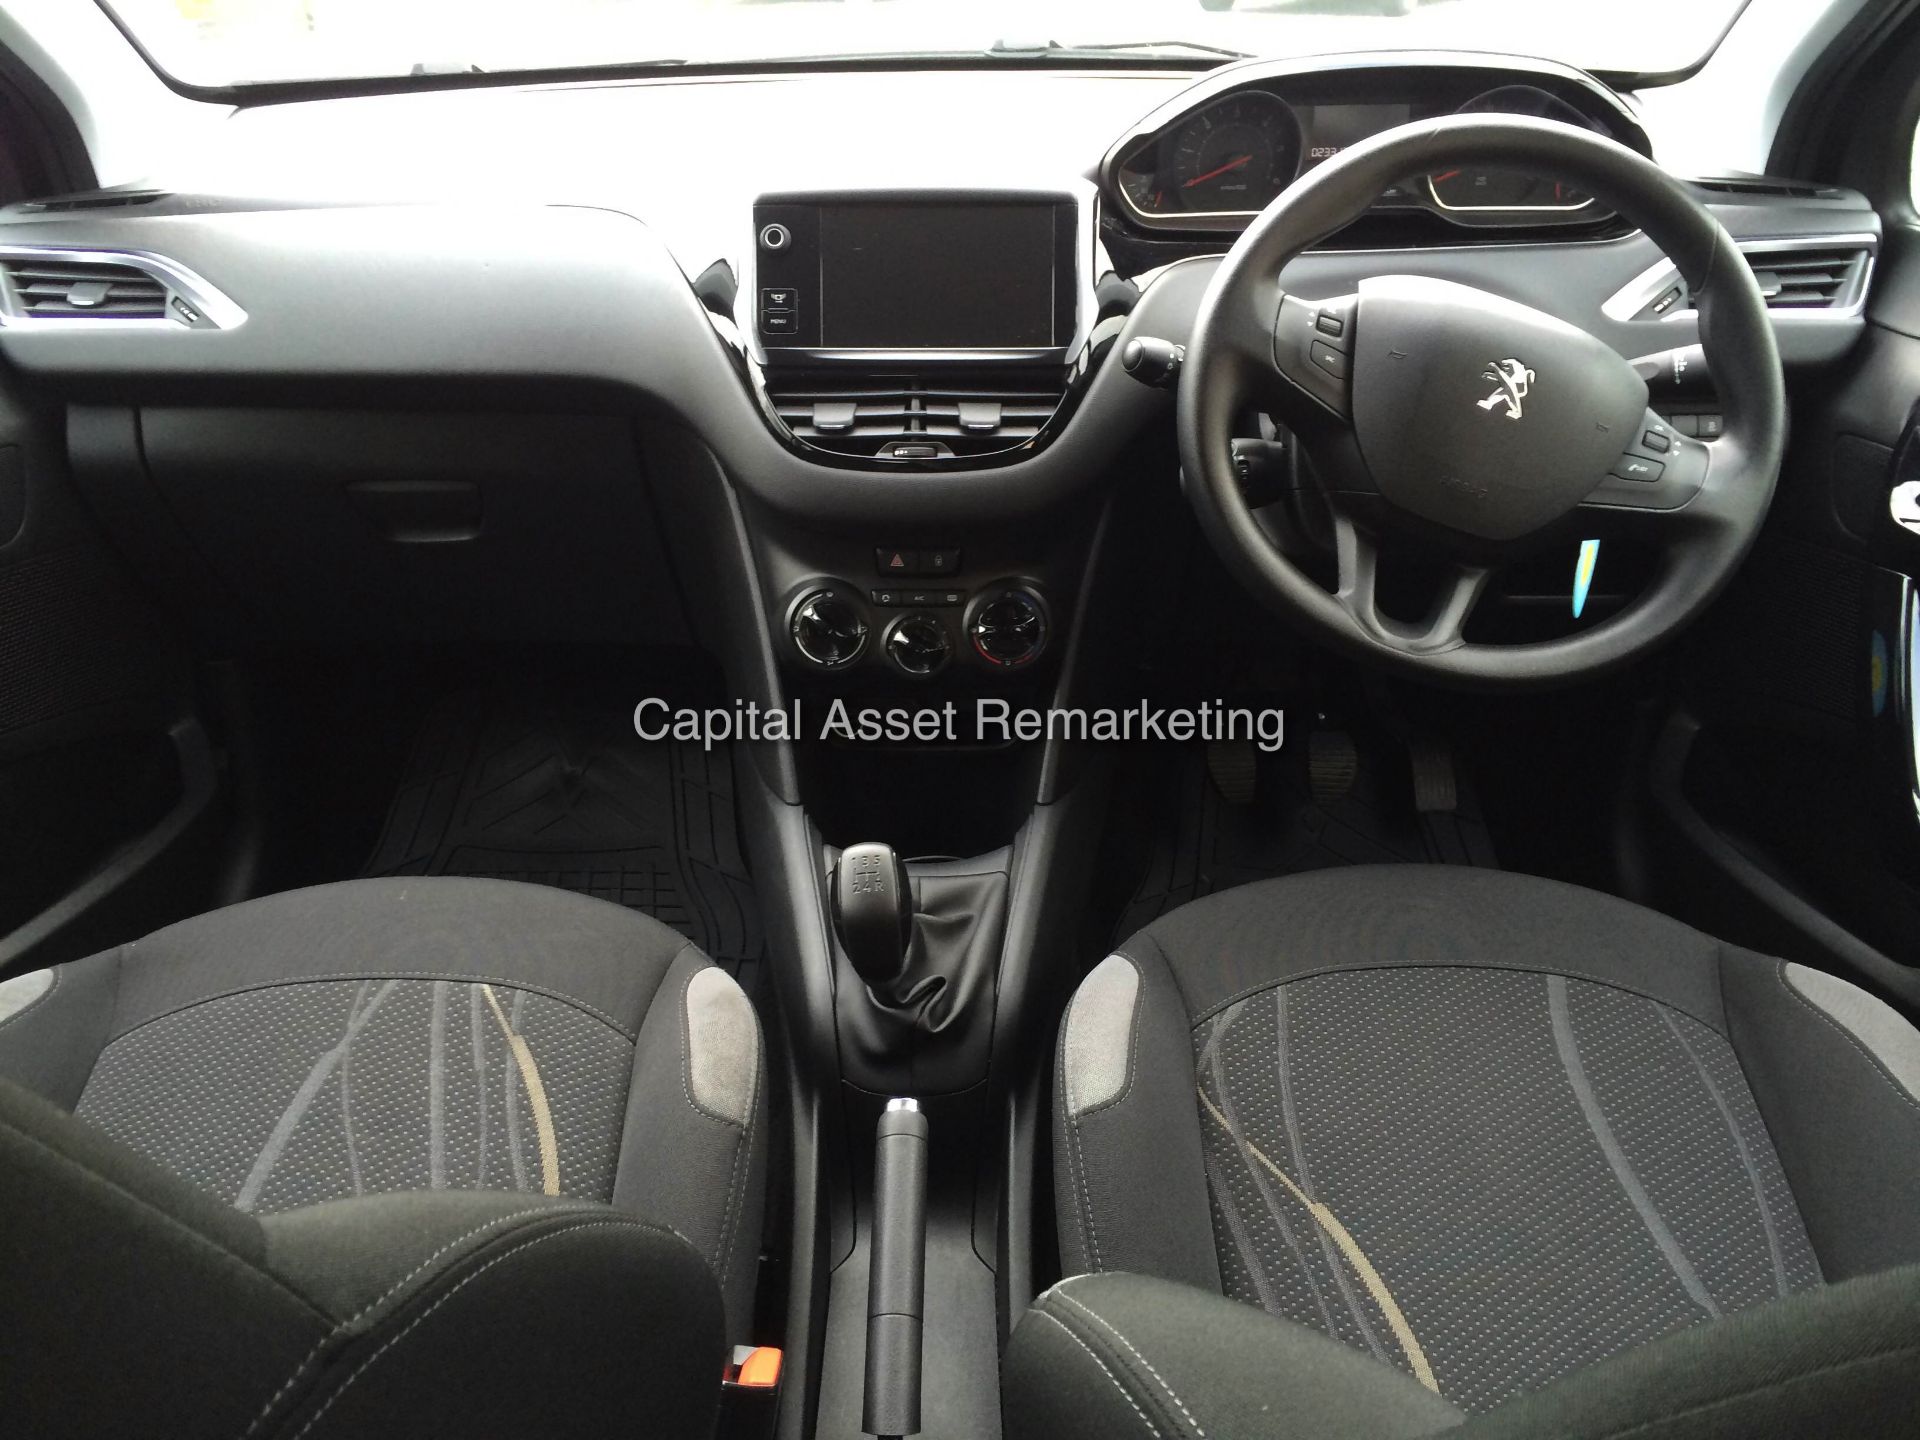 PEUGEOT 208 1.4 HDI 'ACTIVE' 5 DOOR (2014 - 14 REG)  **OWNED BY PEUGEOT FROM NEW** - Image 8 of 15